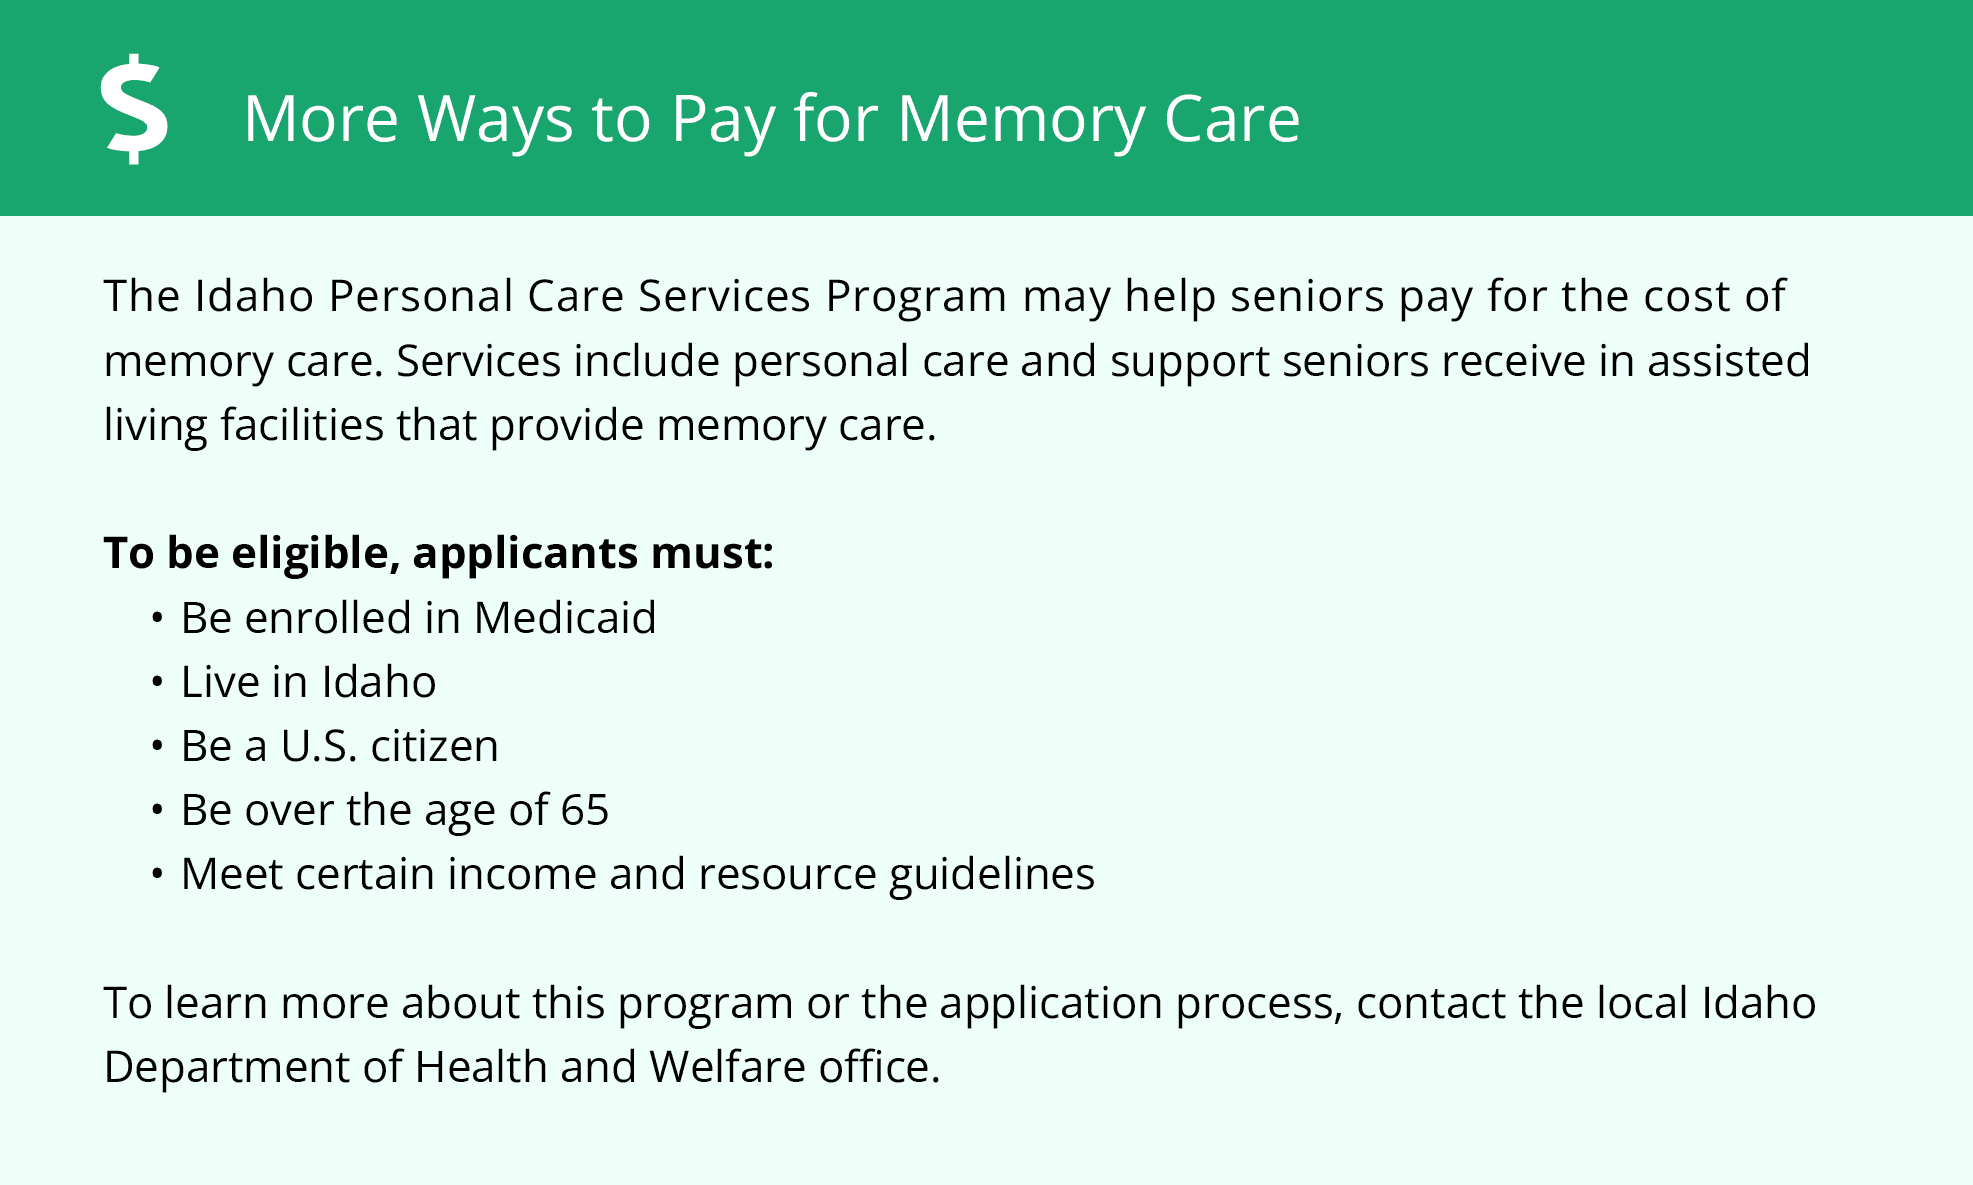 More Ways to Pay for Memory Care - Idaho